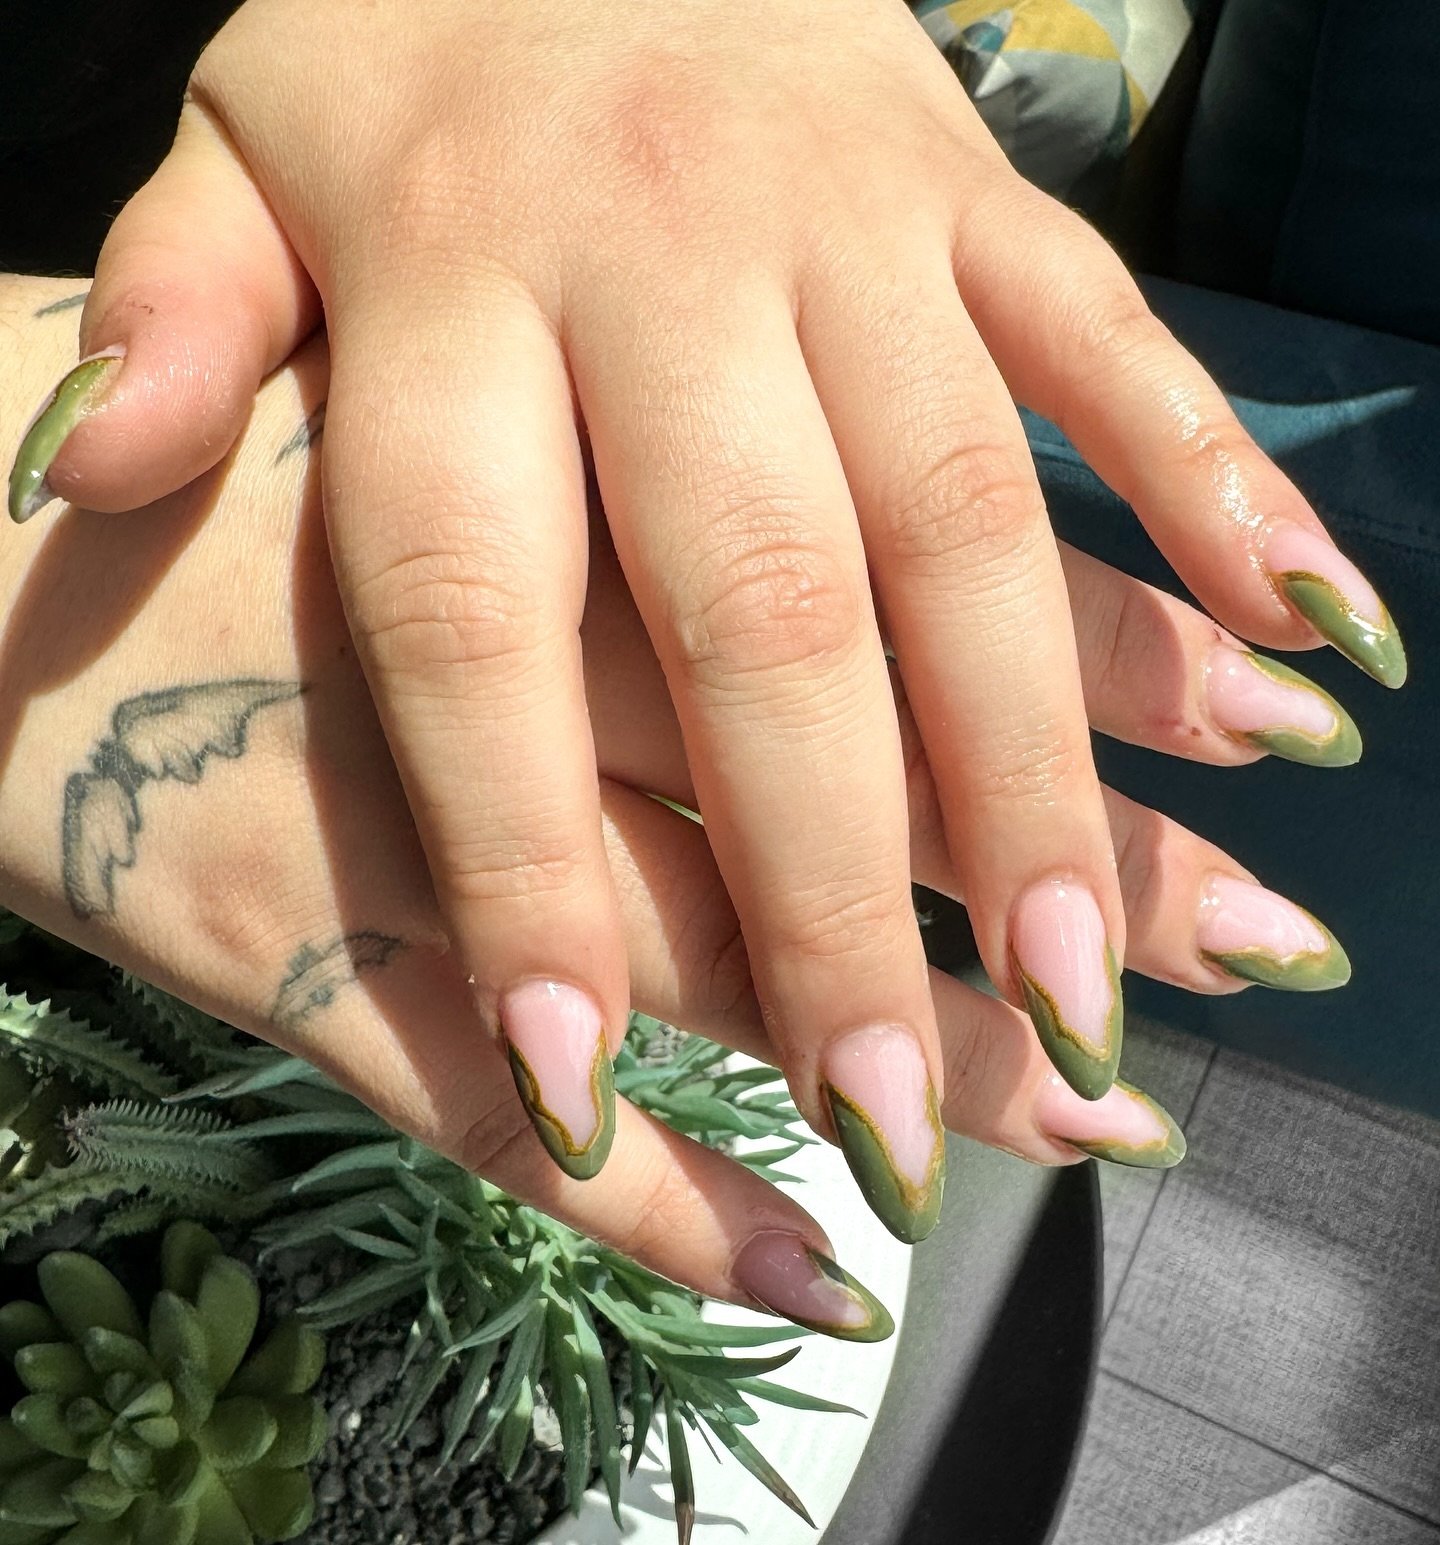 Custom nails for any occasion ✨ we love this twist on a French tip 💚🌿🌱

Nails by @tammynirvana